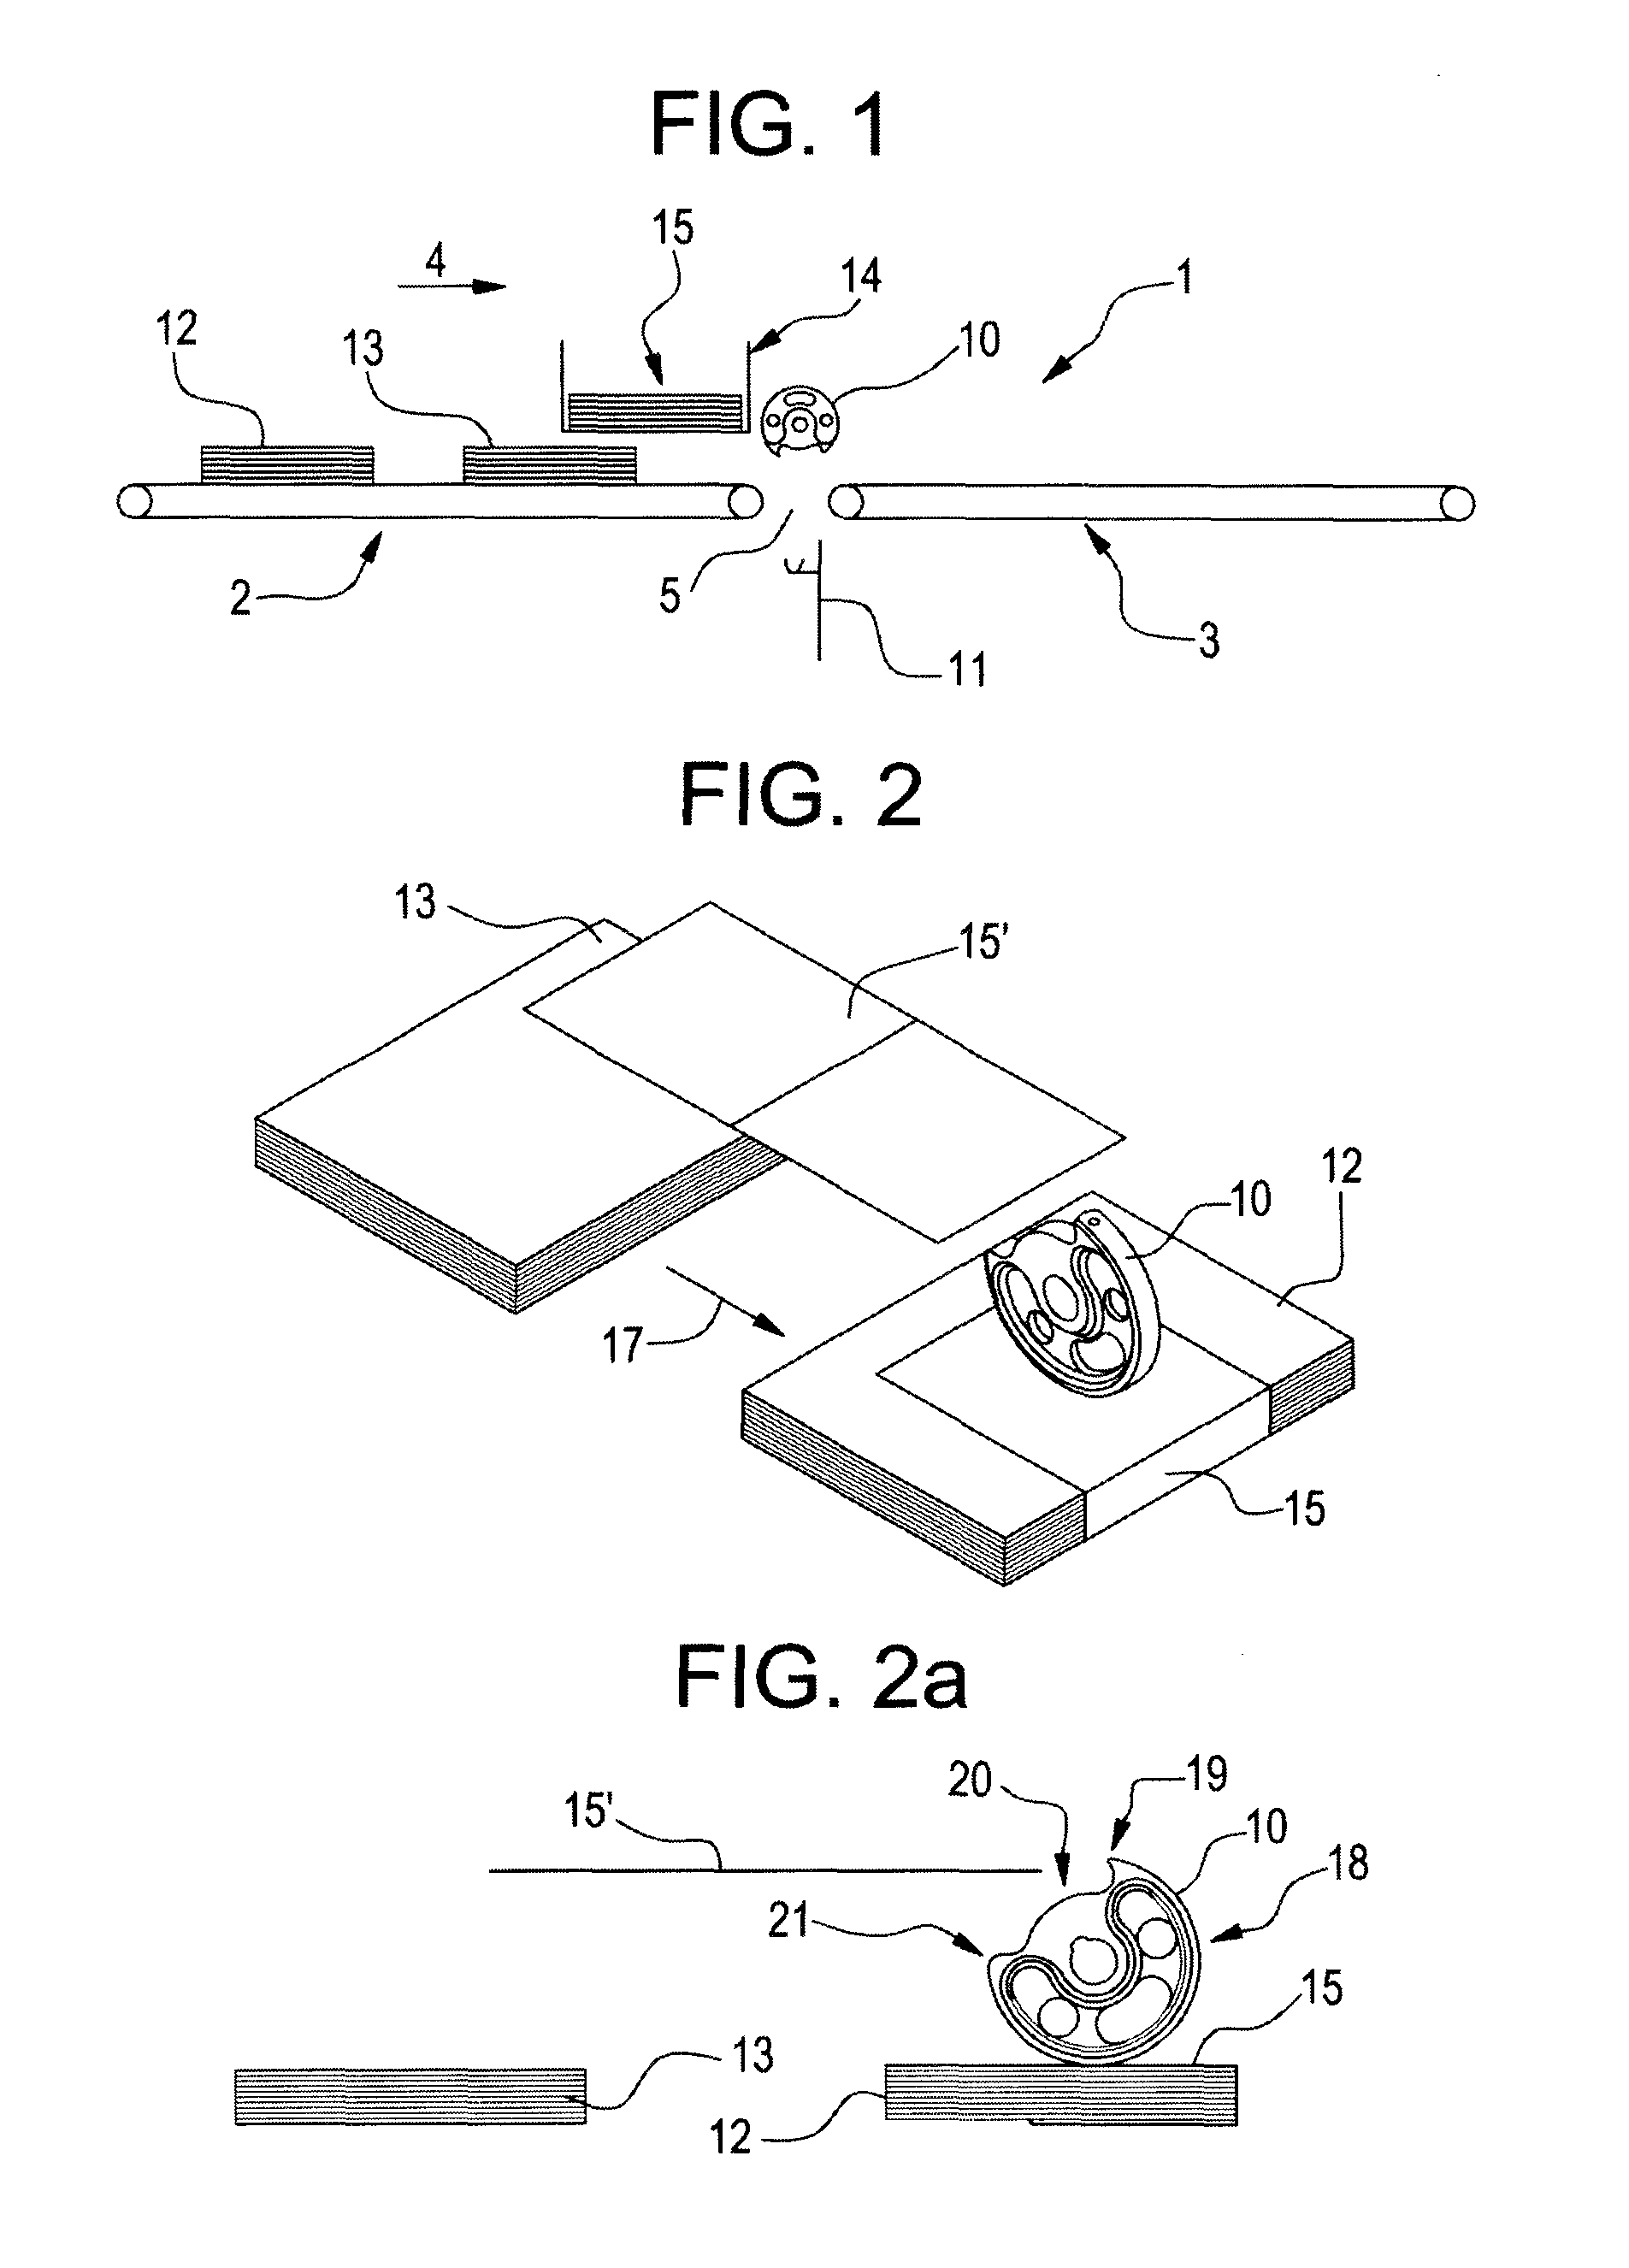 Method and apparatus for wrapping a stack with a wrapping sheet